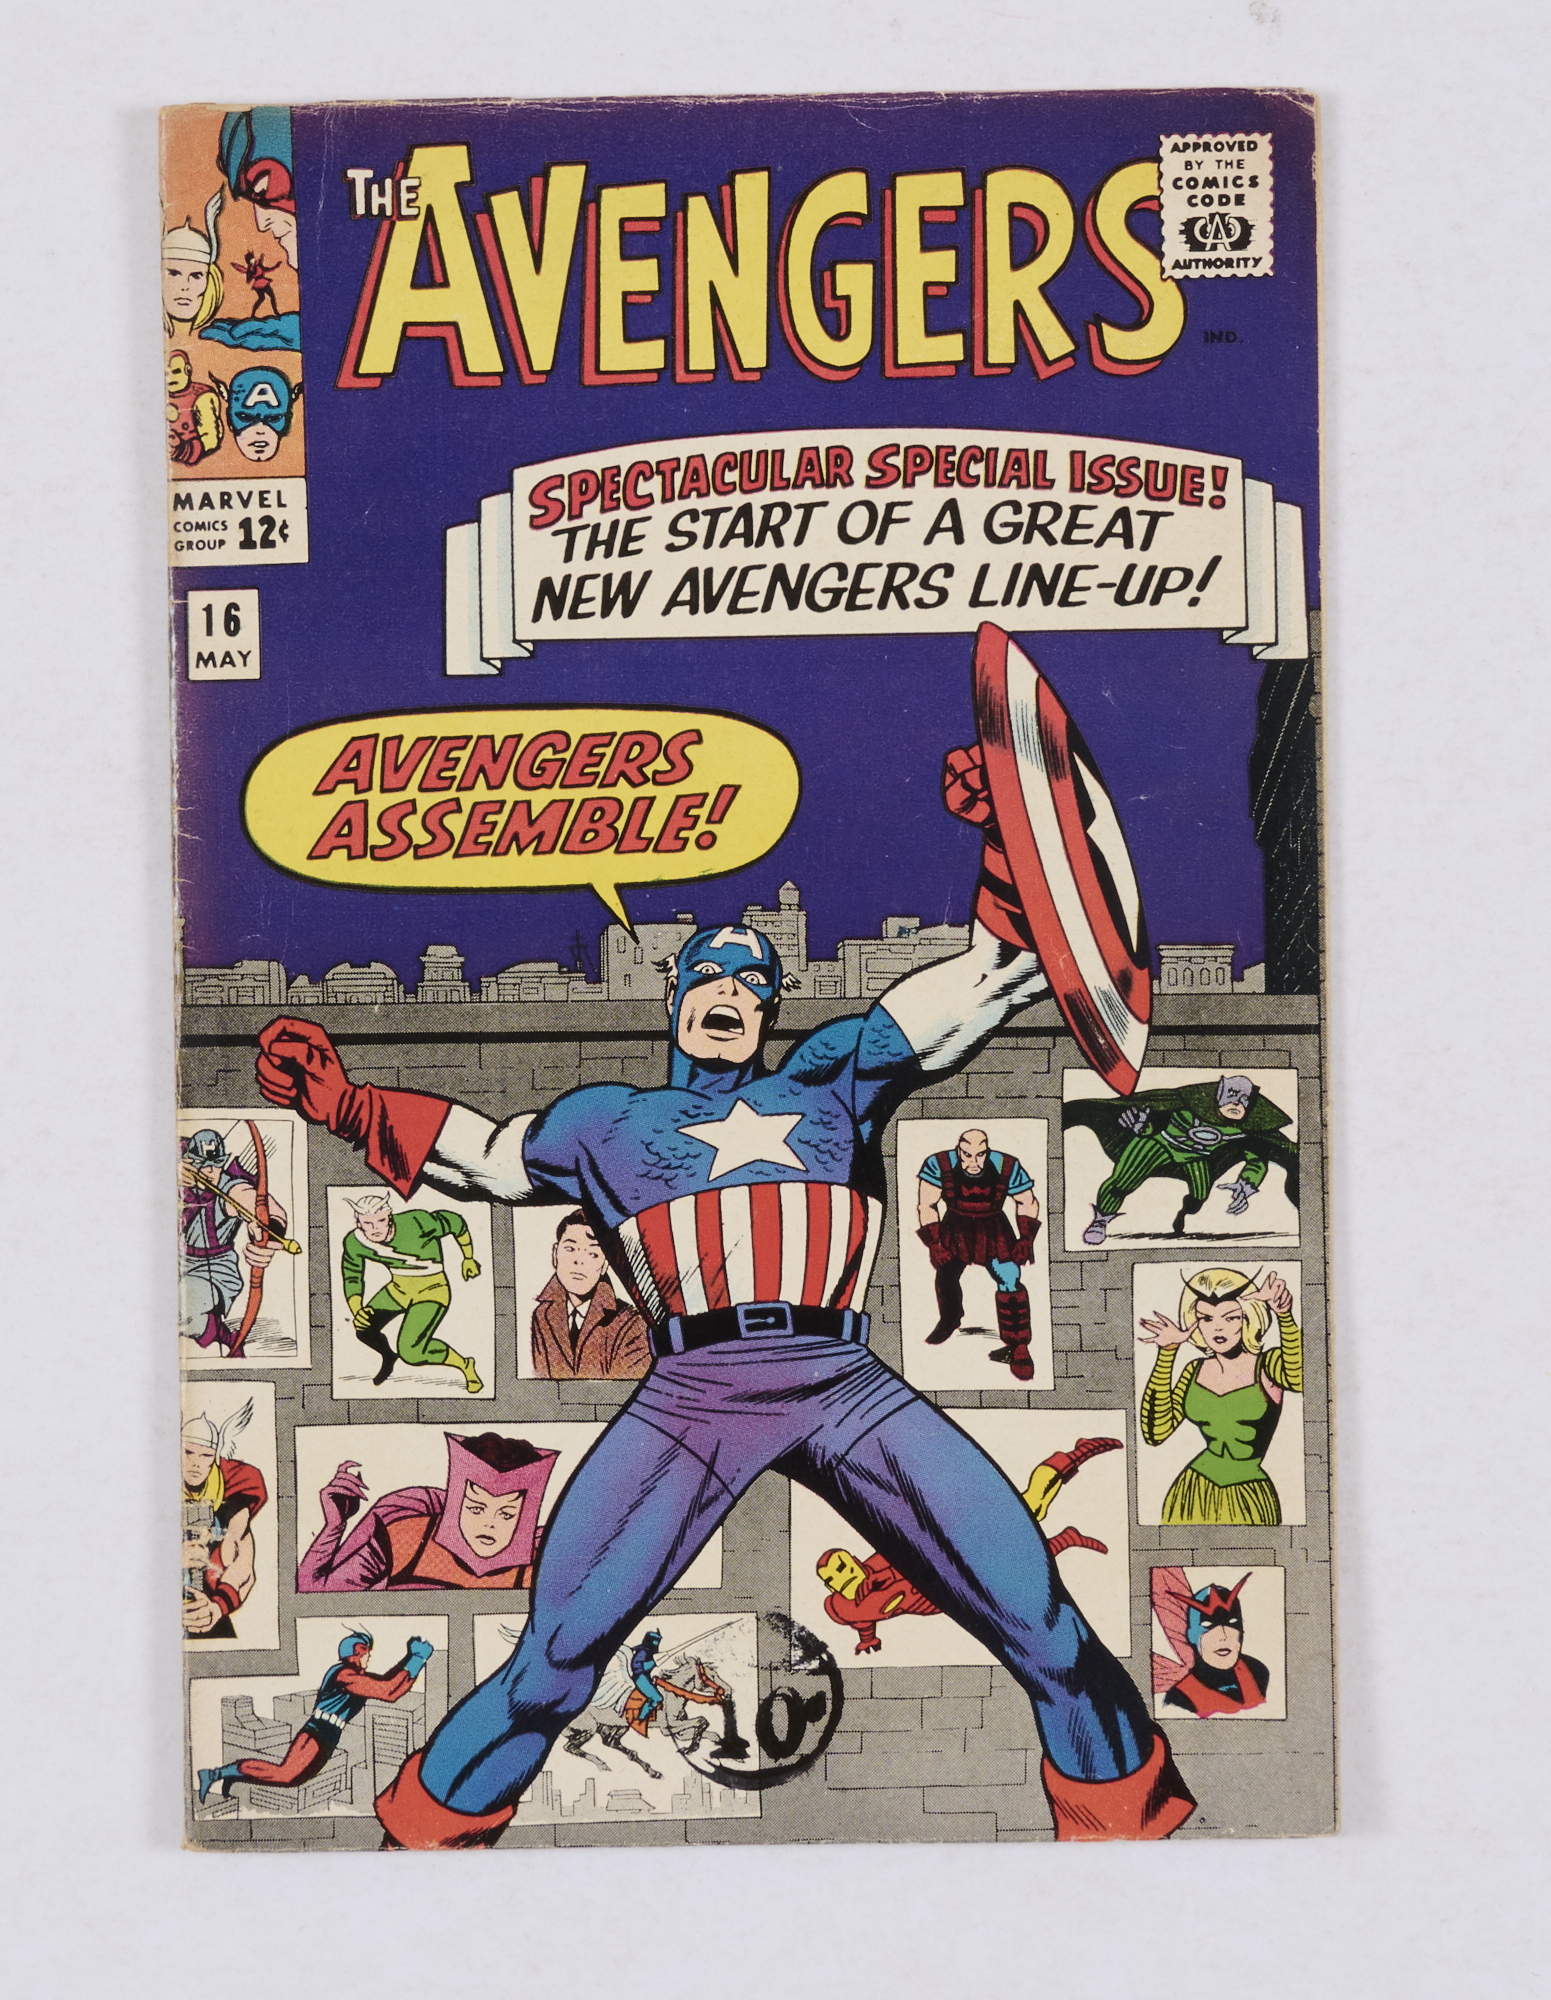 Avengers 16 (1965). Two small holes at lower spine piercing through front half of book [vg/fn]. No